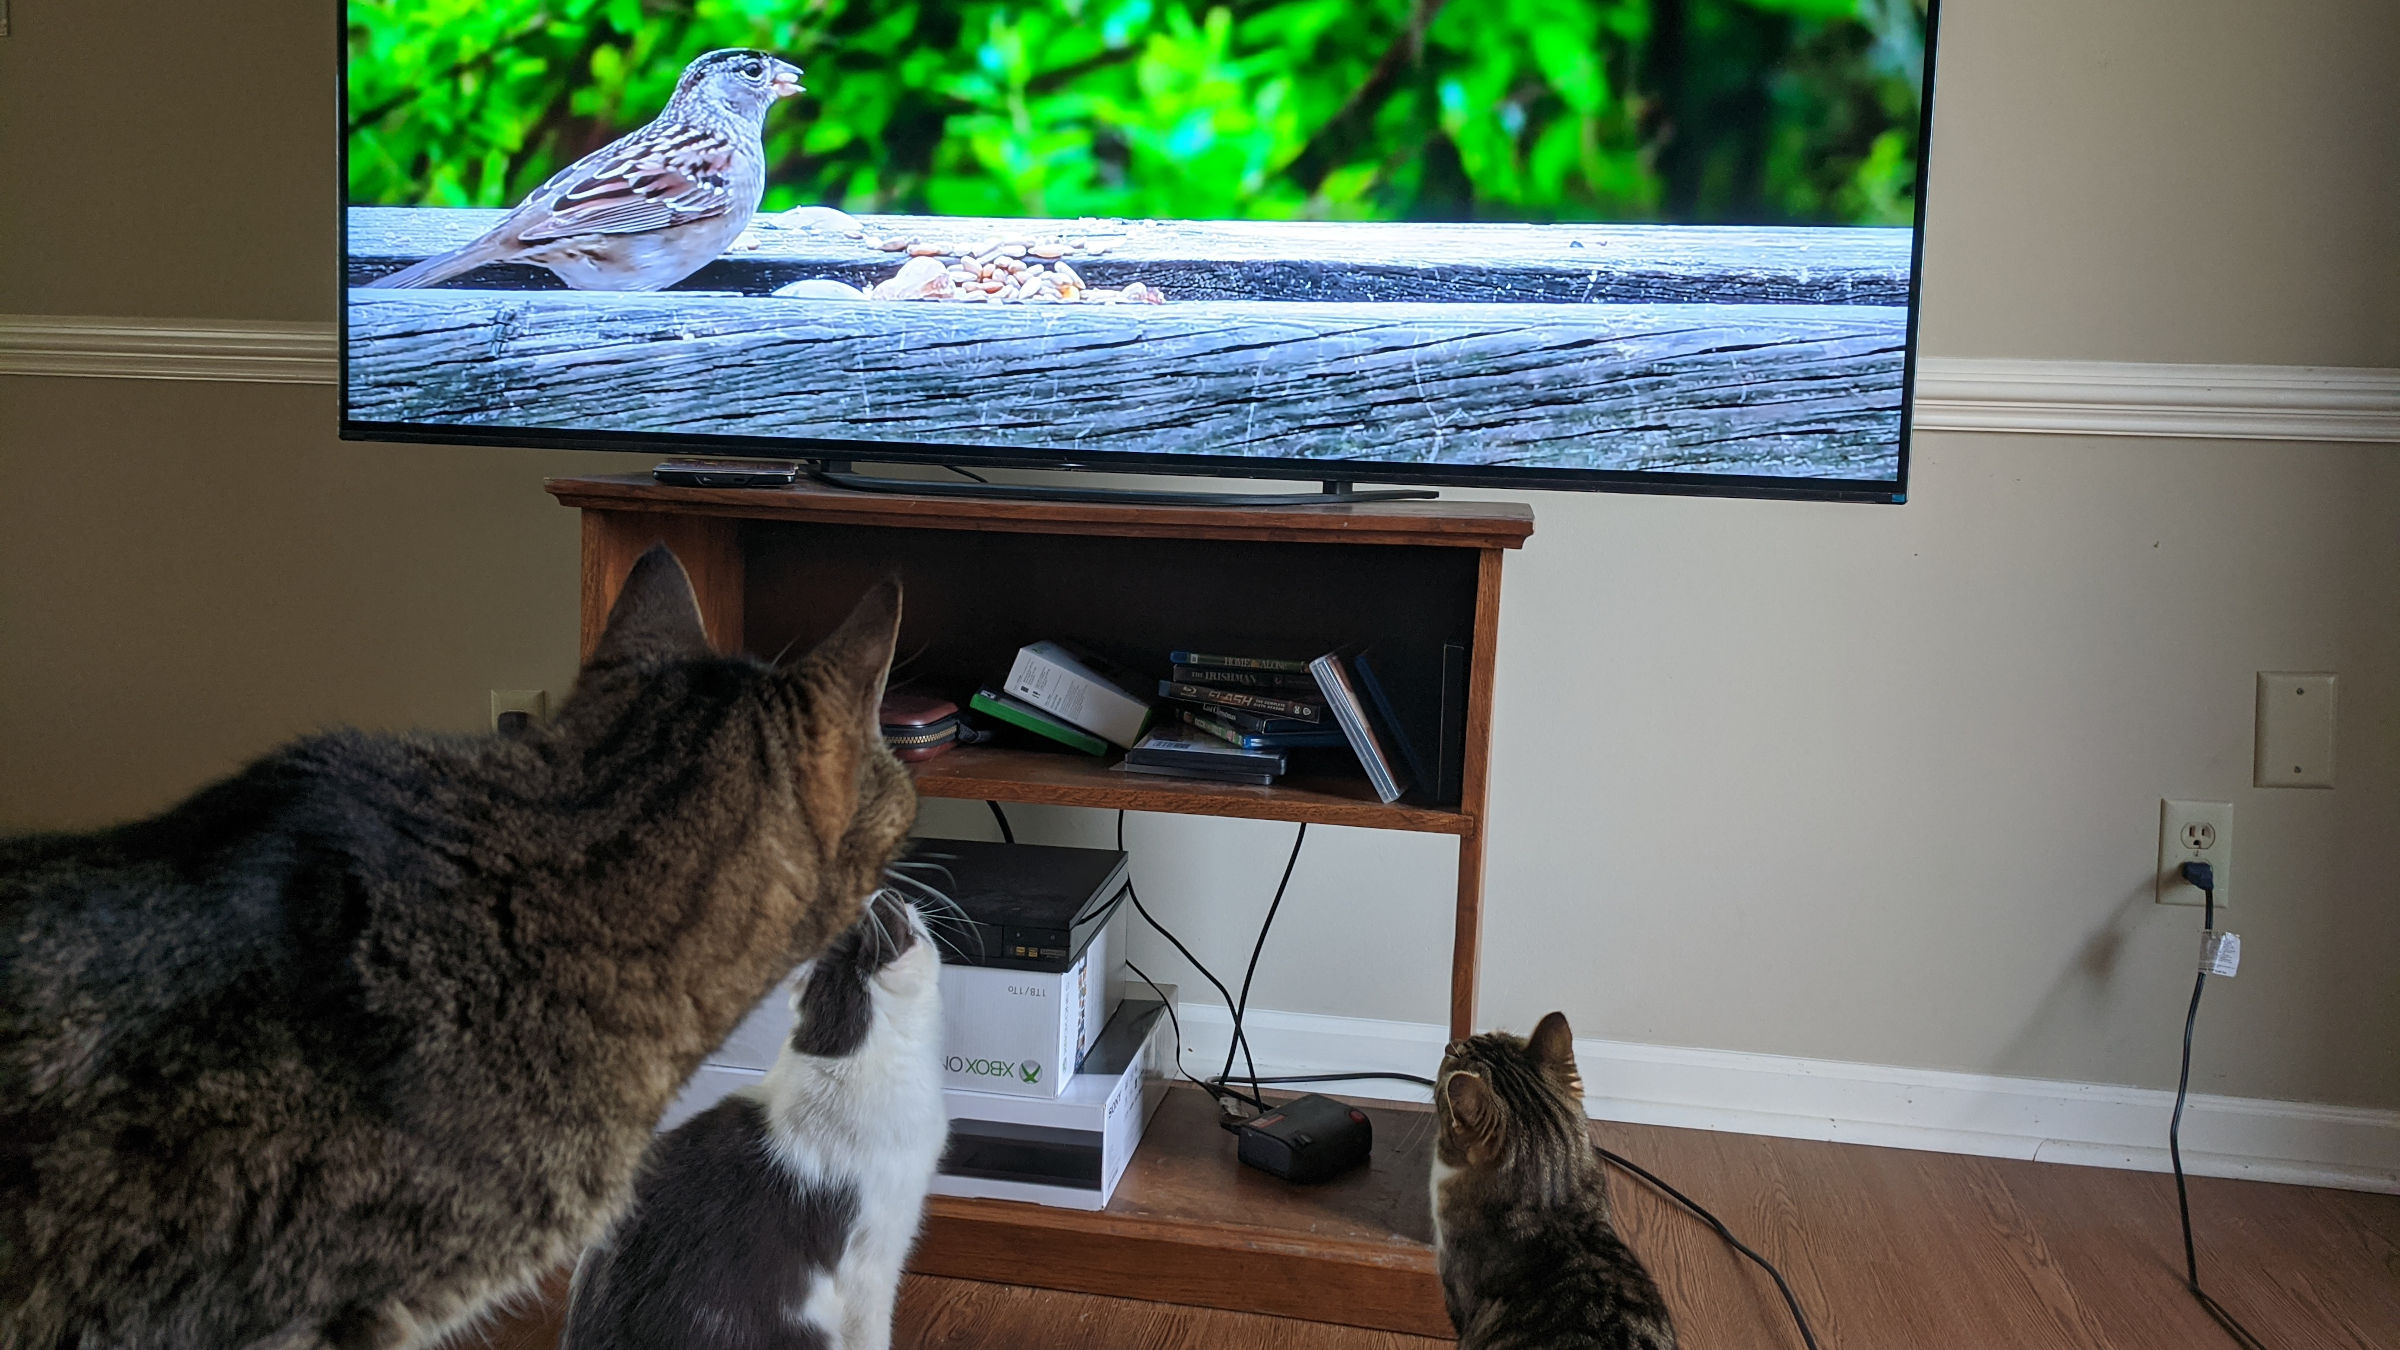 Cats (Smeagle, Oreo, and Twinkle) watching a bird on TV.